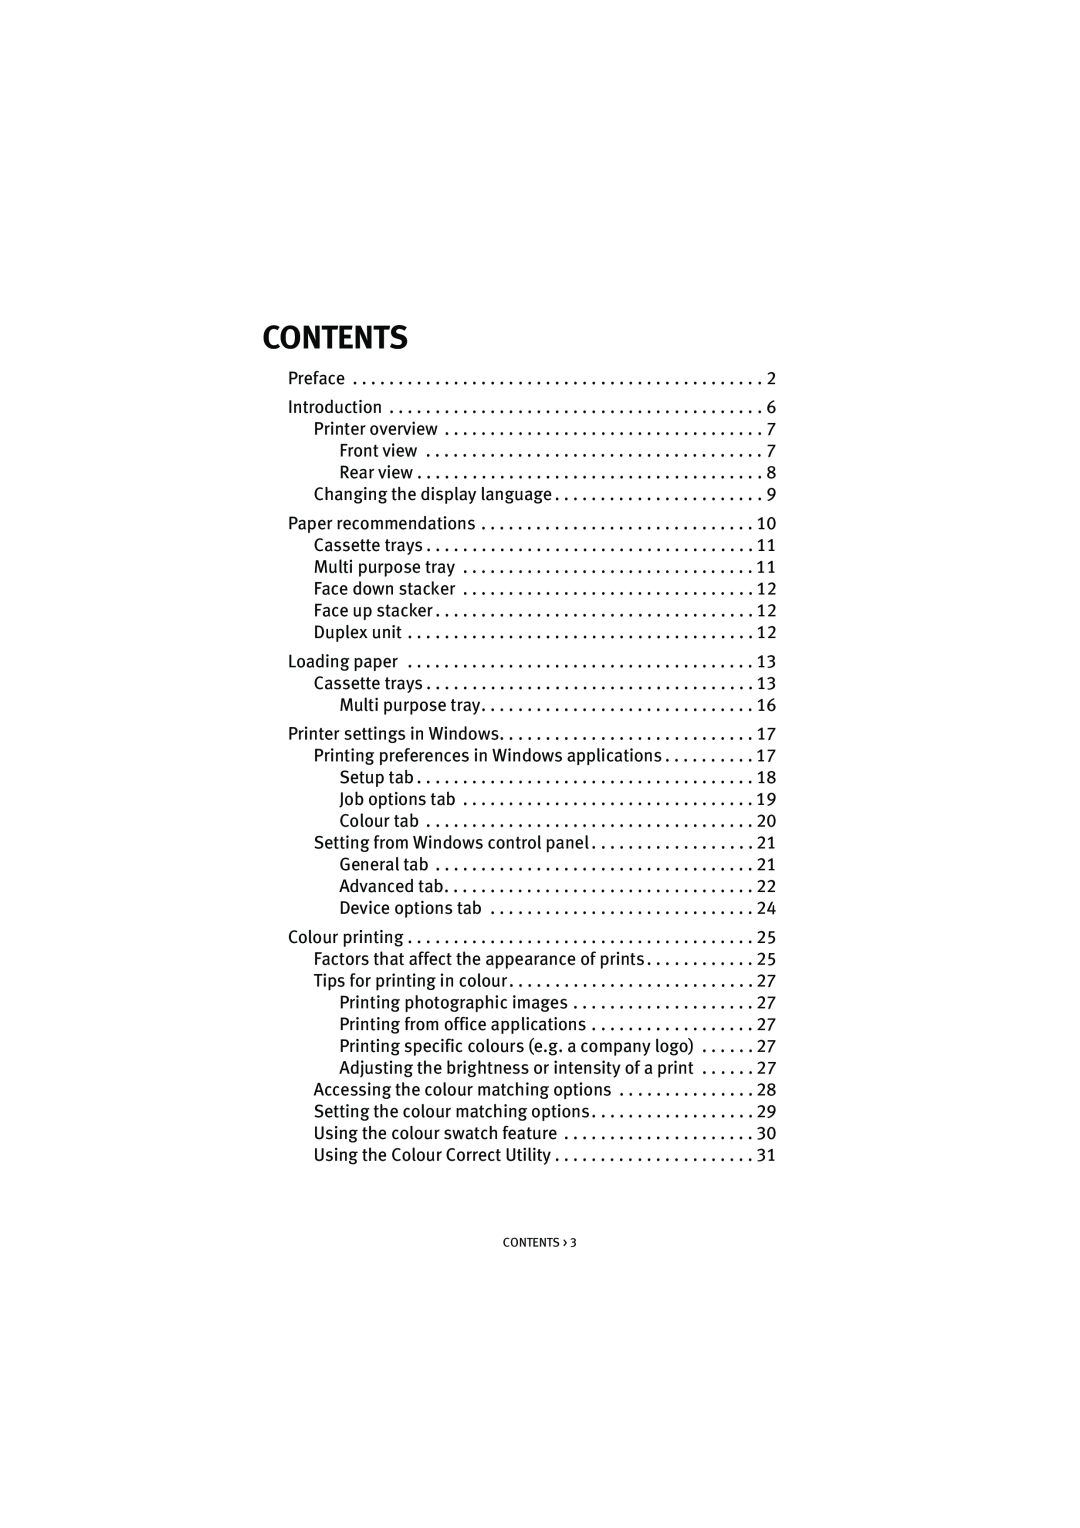 Oki 5200n manual Contents, Preface 